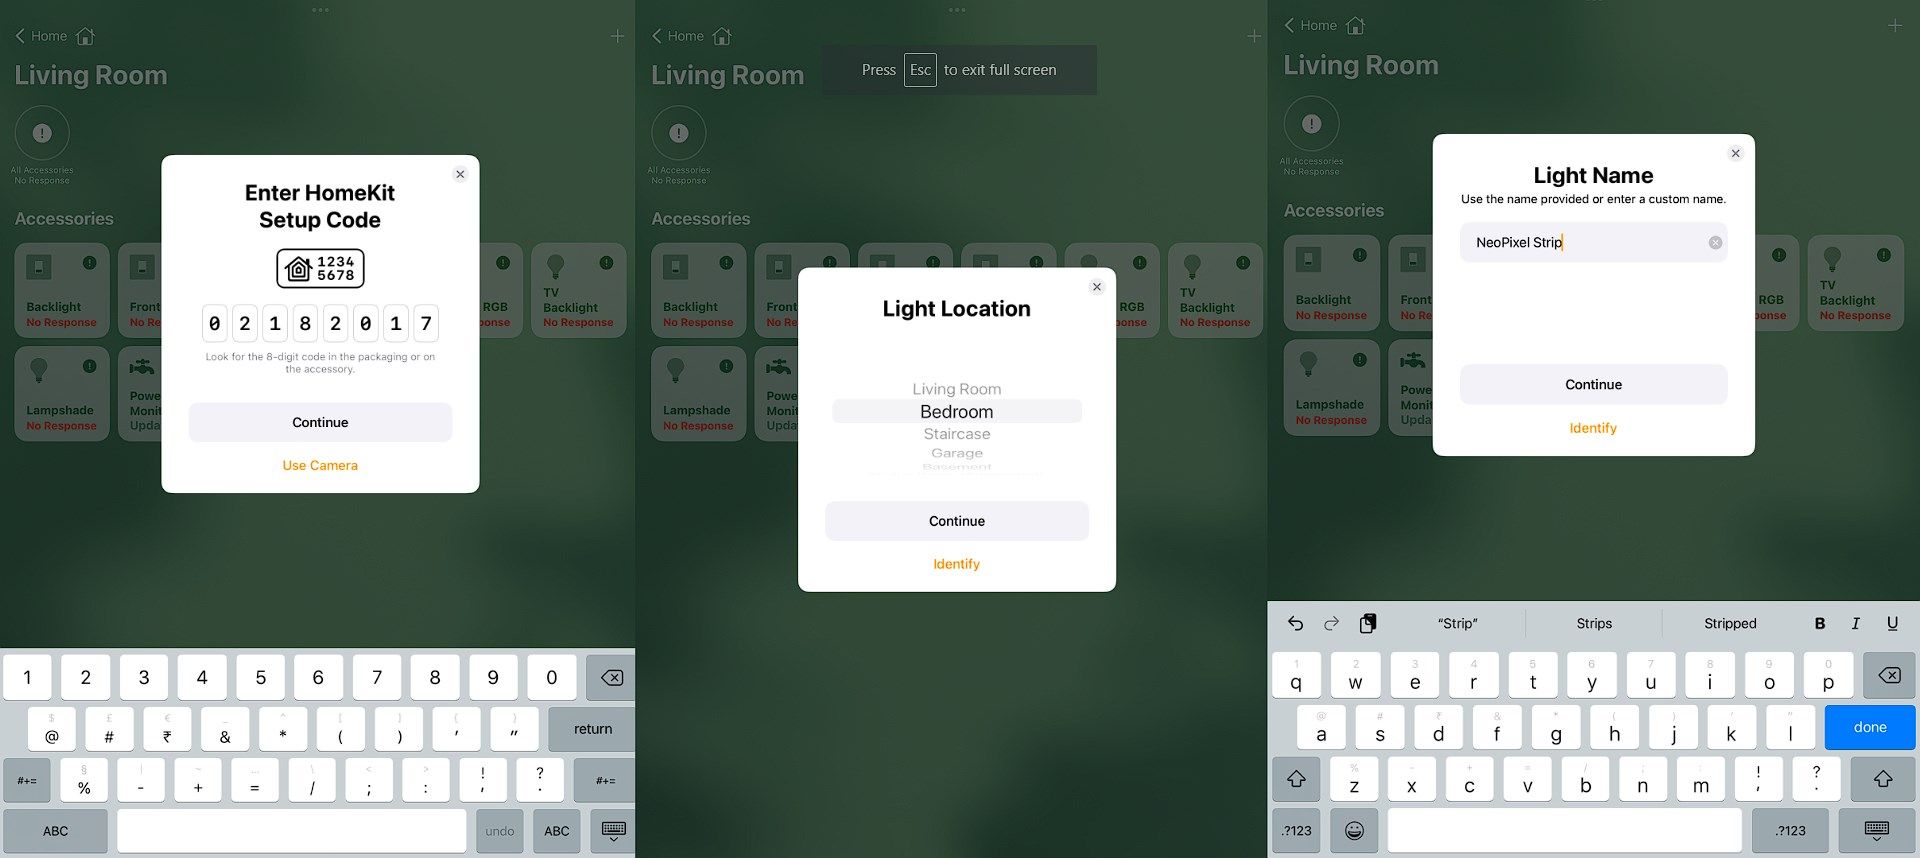 type the accessory code to add it to one of the rooms in homekit app